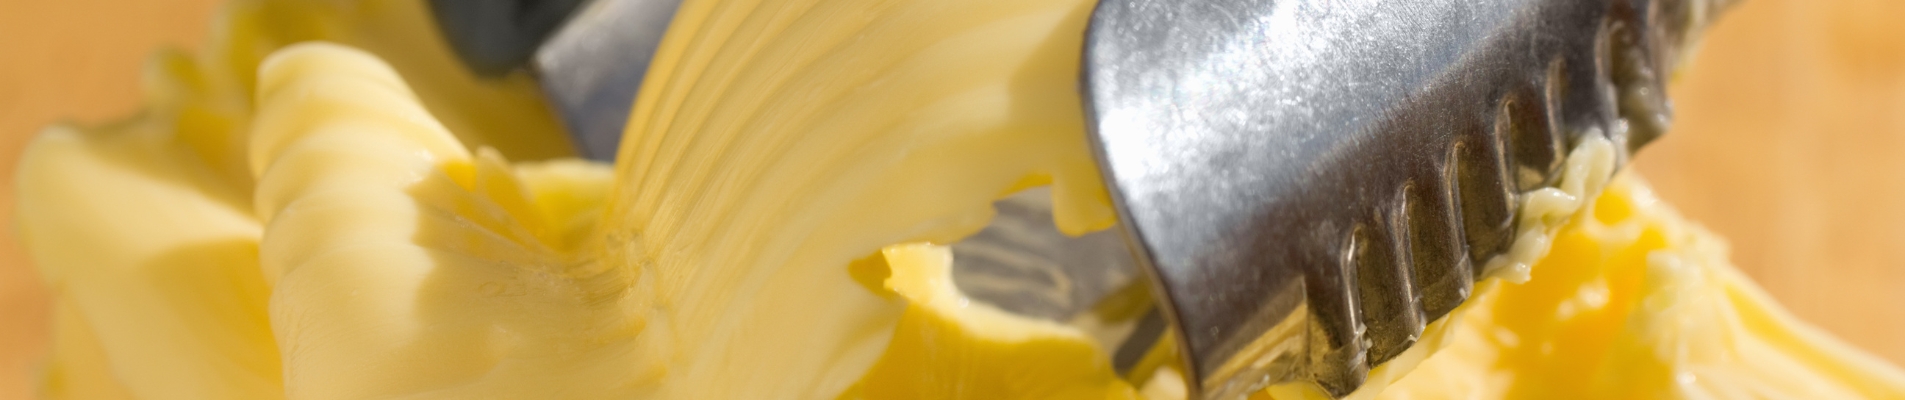 Types of Butter and The Best Way To Use Them